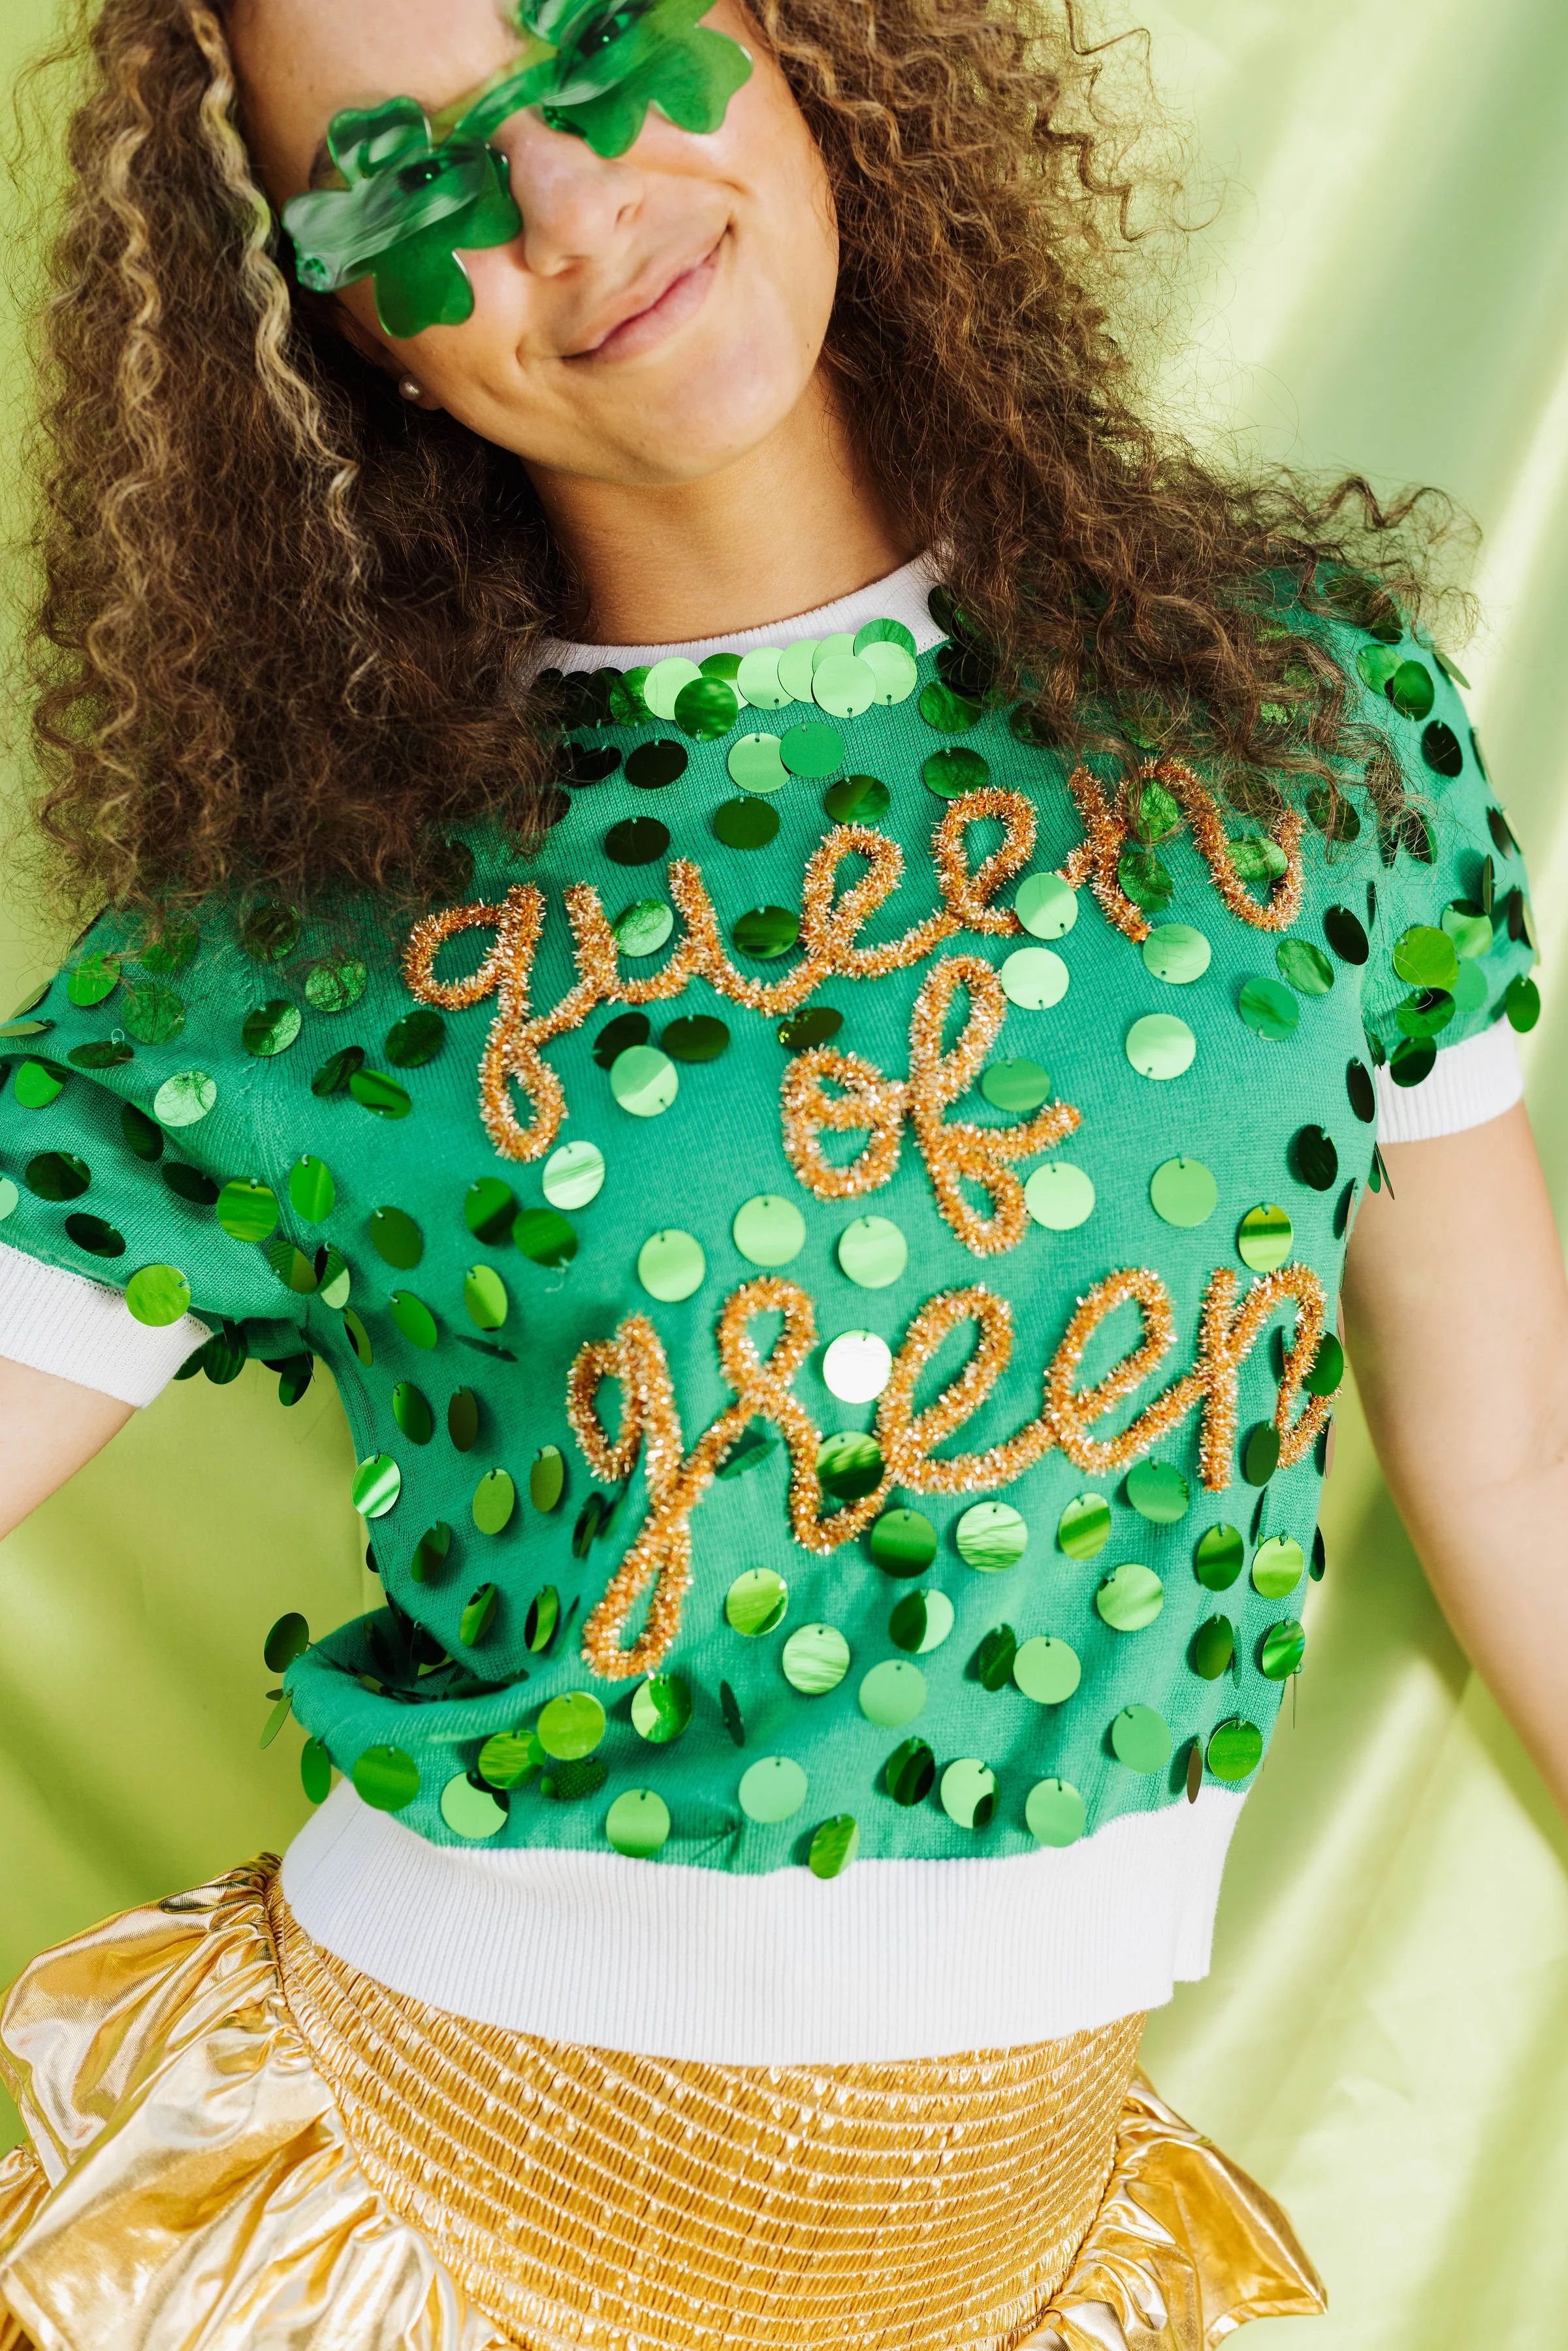 Queen of Green Paillette Sweater | Queen of Sparkles